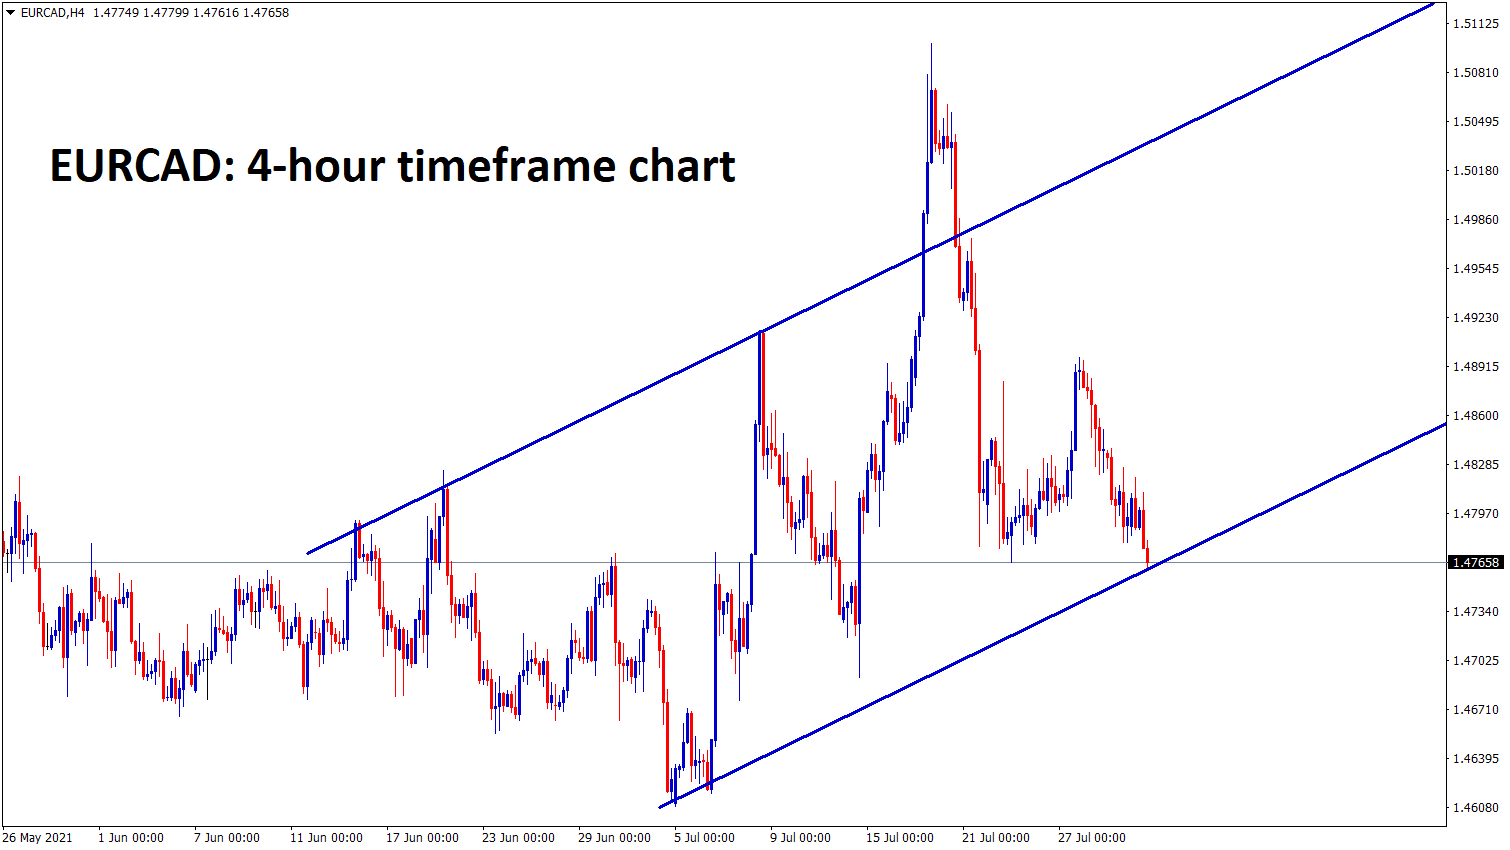 EURCAD is standing at the higher low zone of the Up trend line